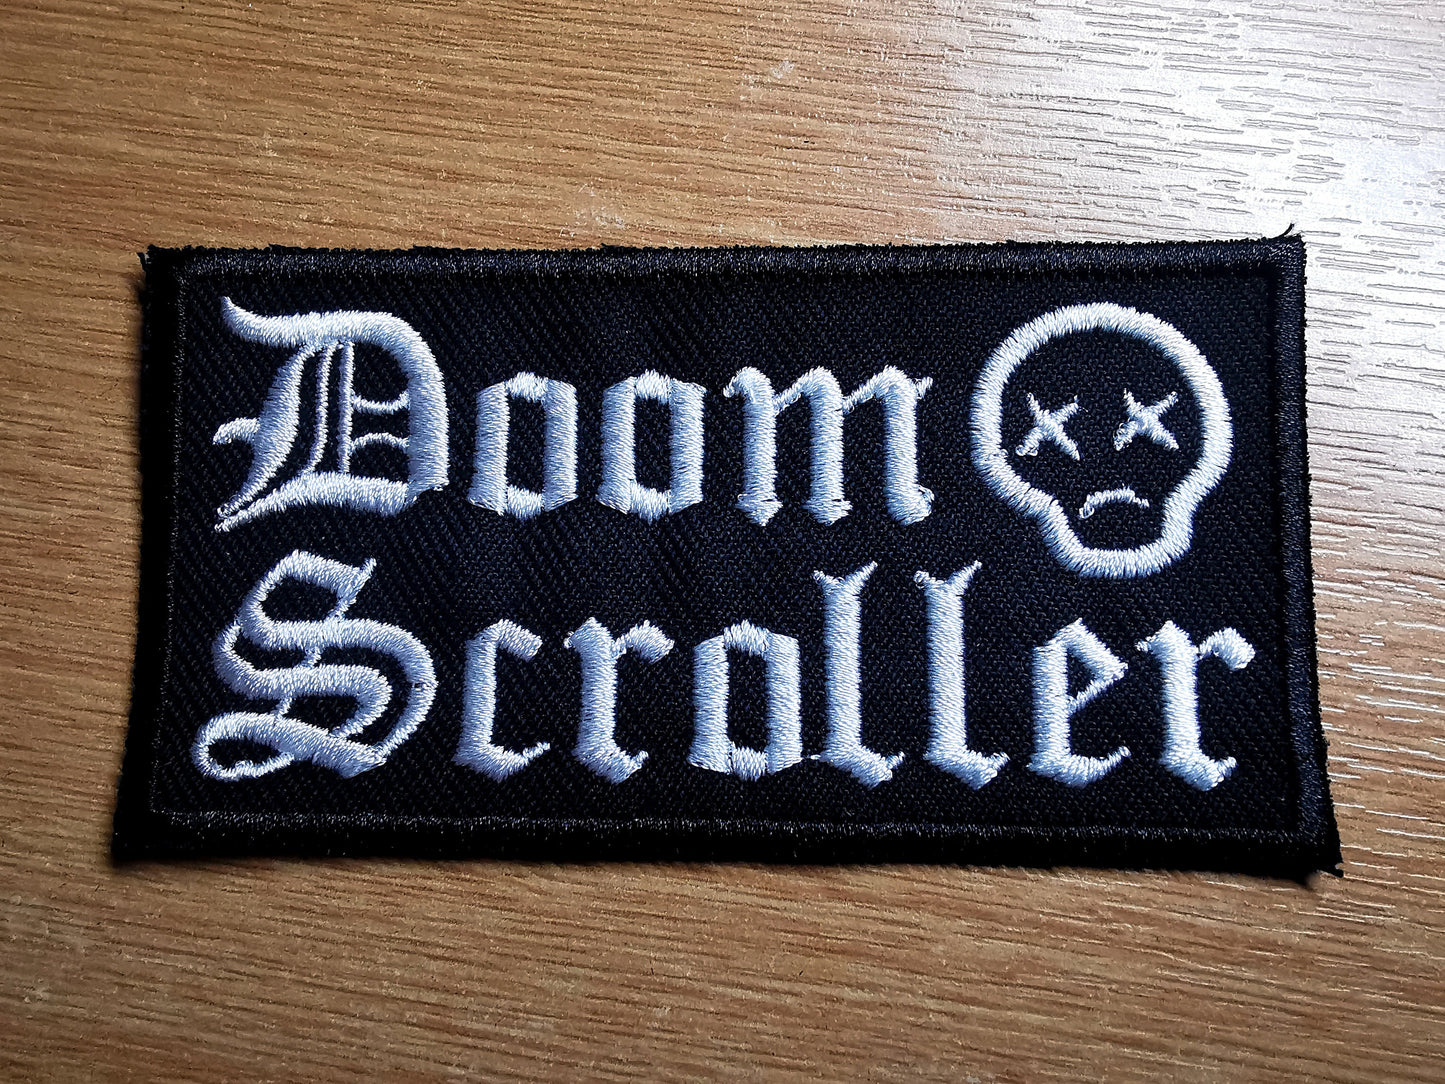 Doom Scroller Embroidered Patch Doom Scrolling and ADHD